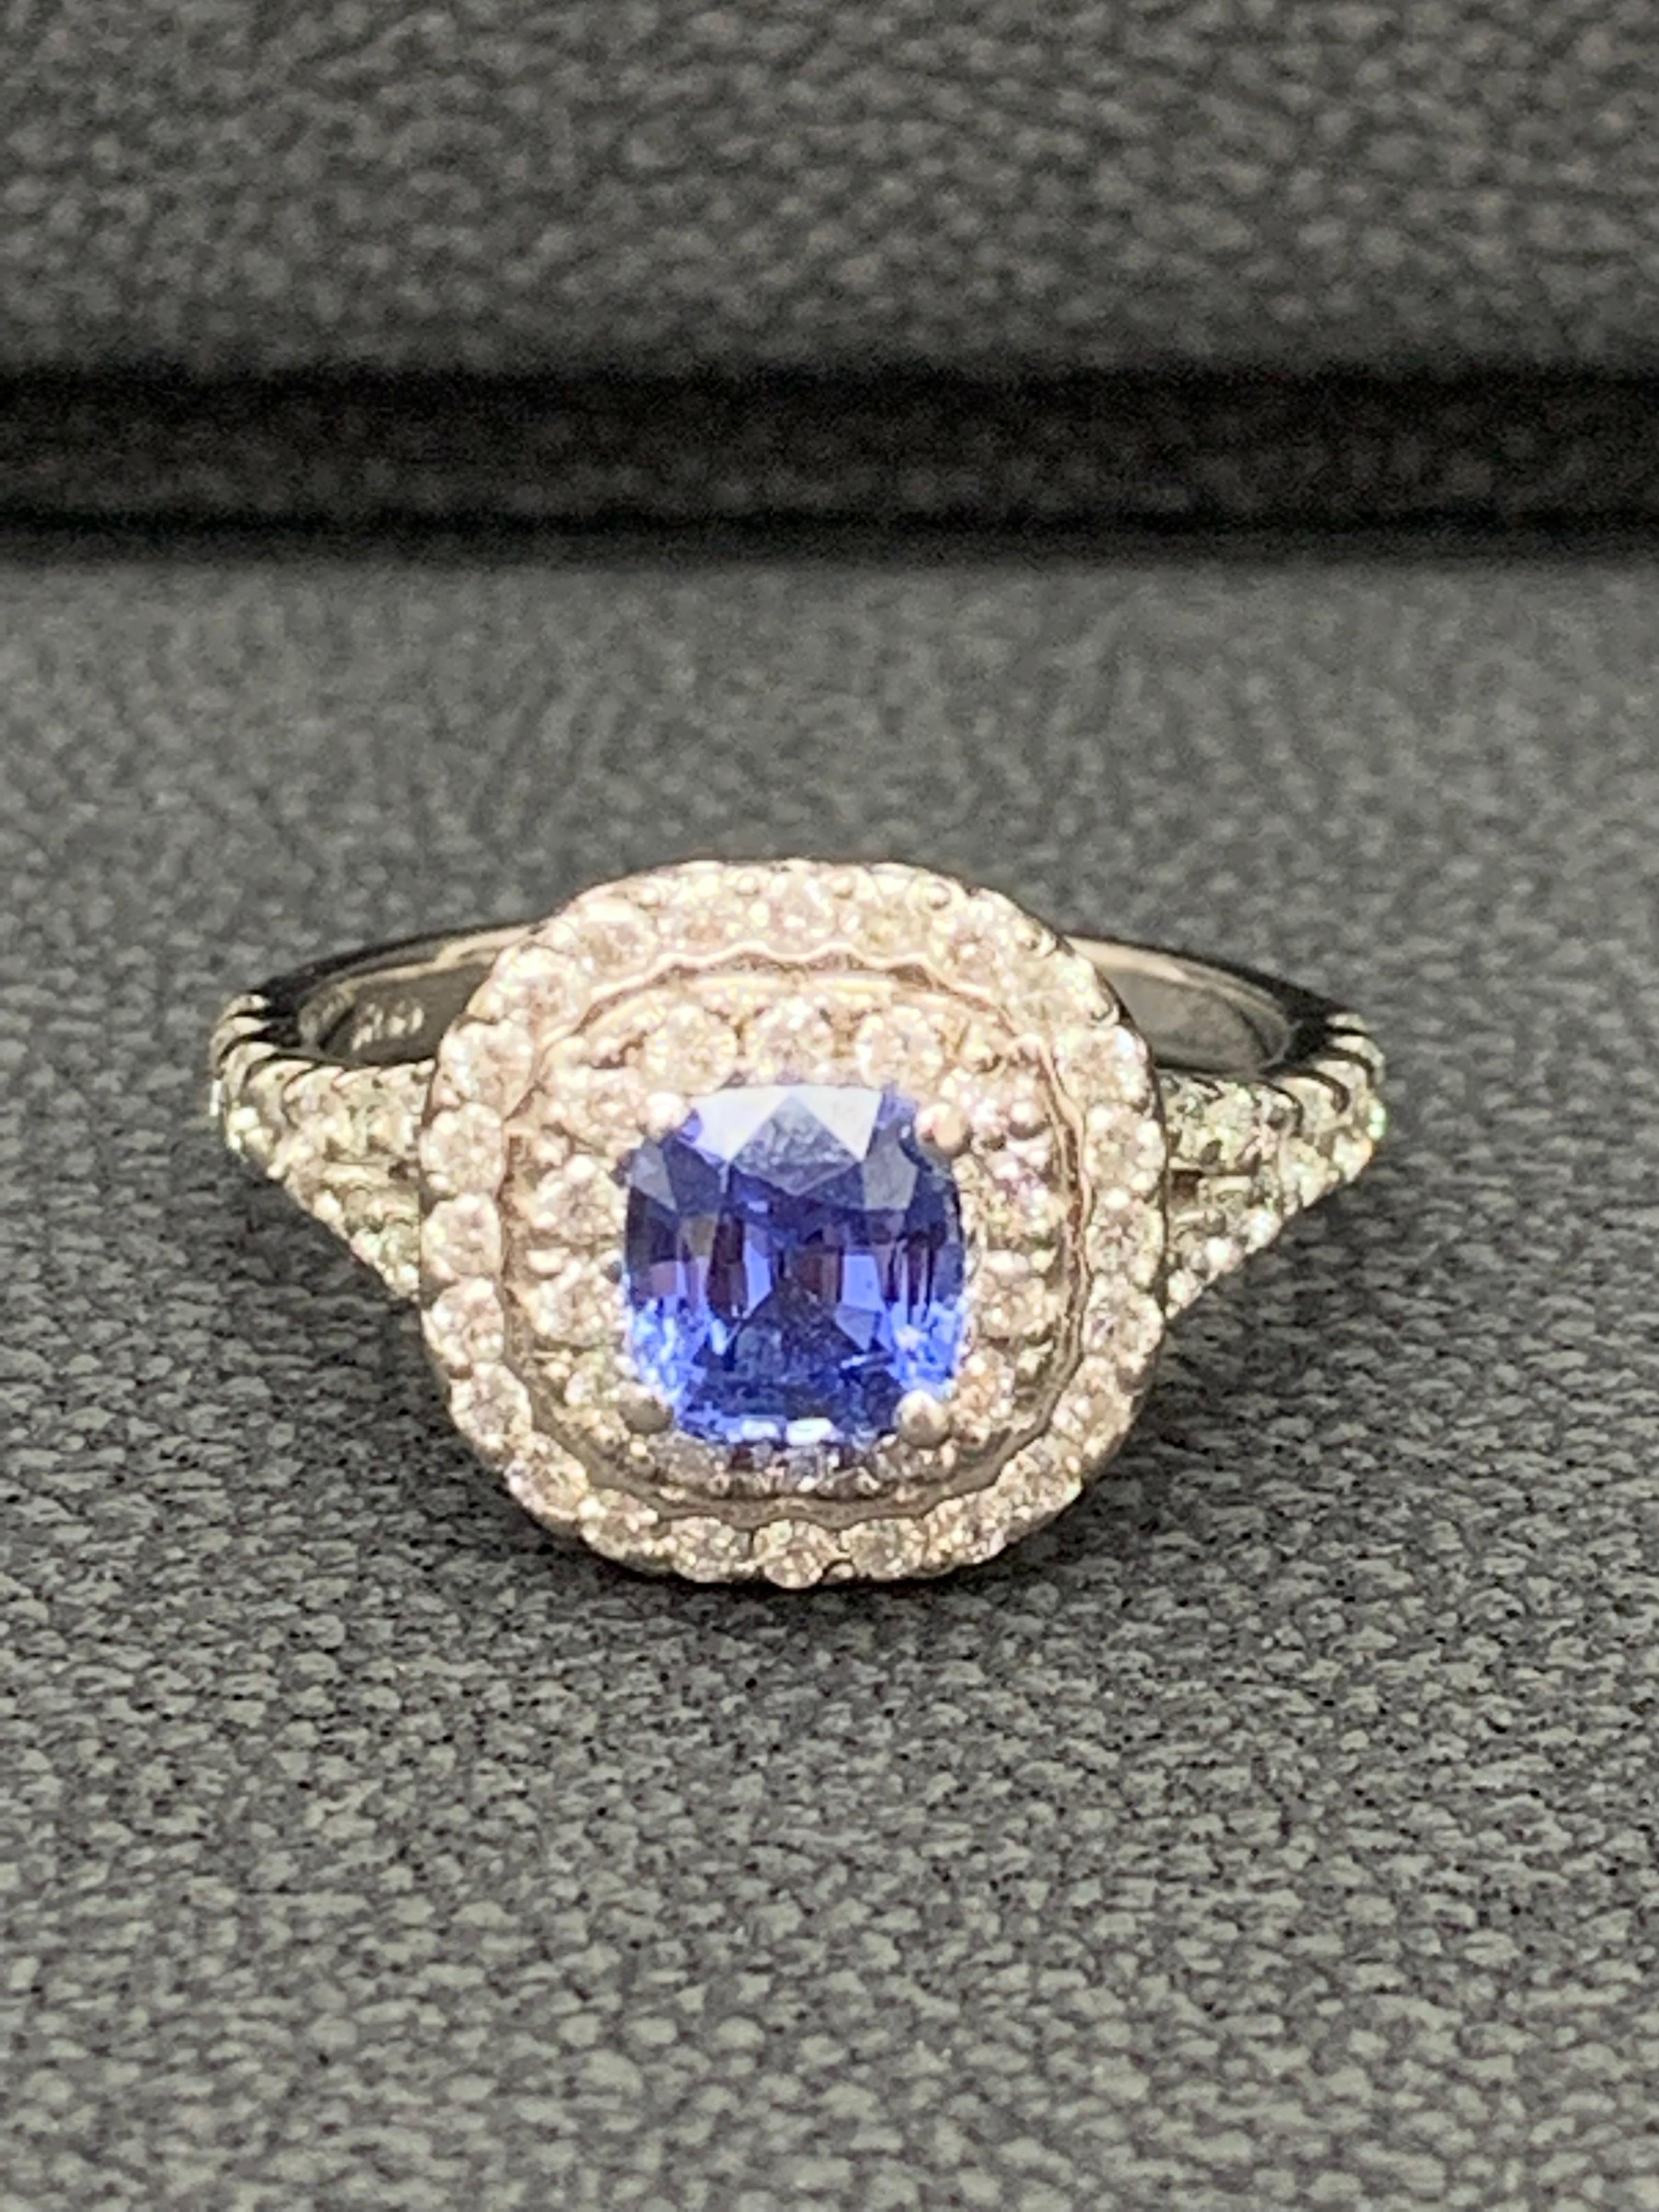 Showcasing a 1.20 carat cushion cut blue sapphire. BLUE color with no indications of heat treatment. Surrounding the sapphire are 2  rows of round brilliant diamonds, in a diamond encrusted mounting made in 14K white gold. Accent diamonds weigh 0.88